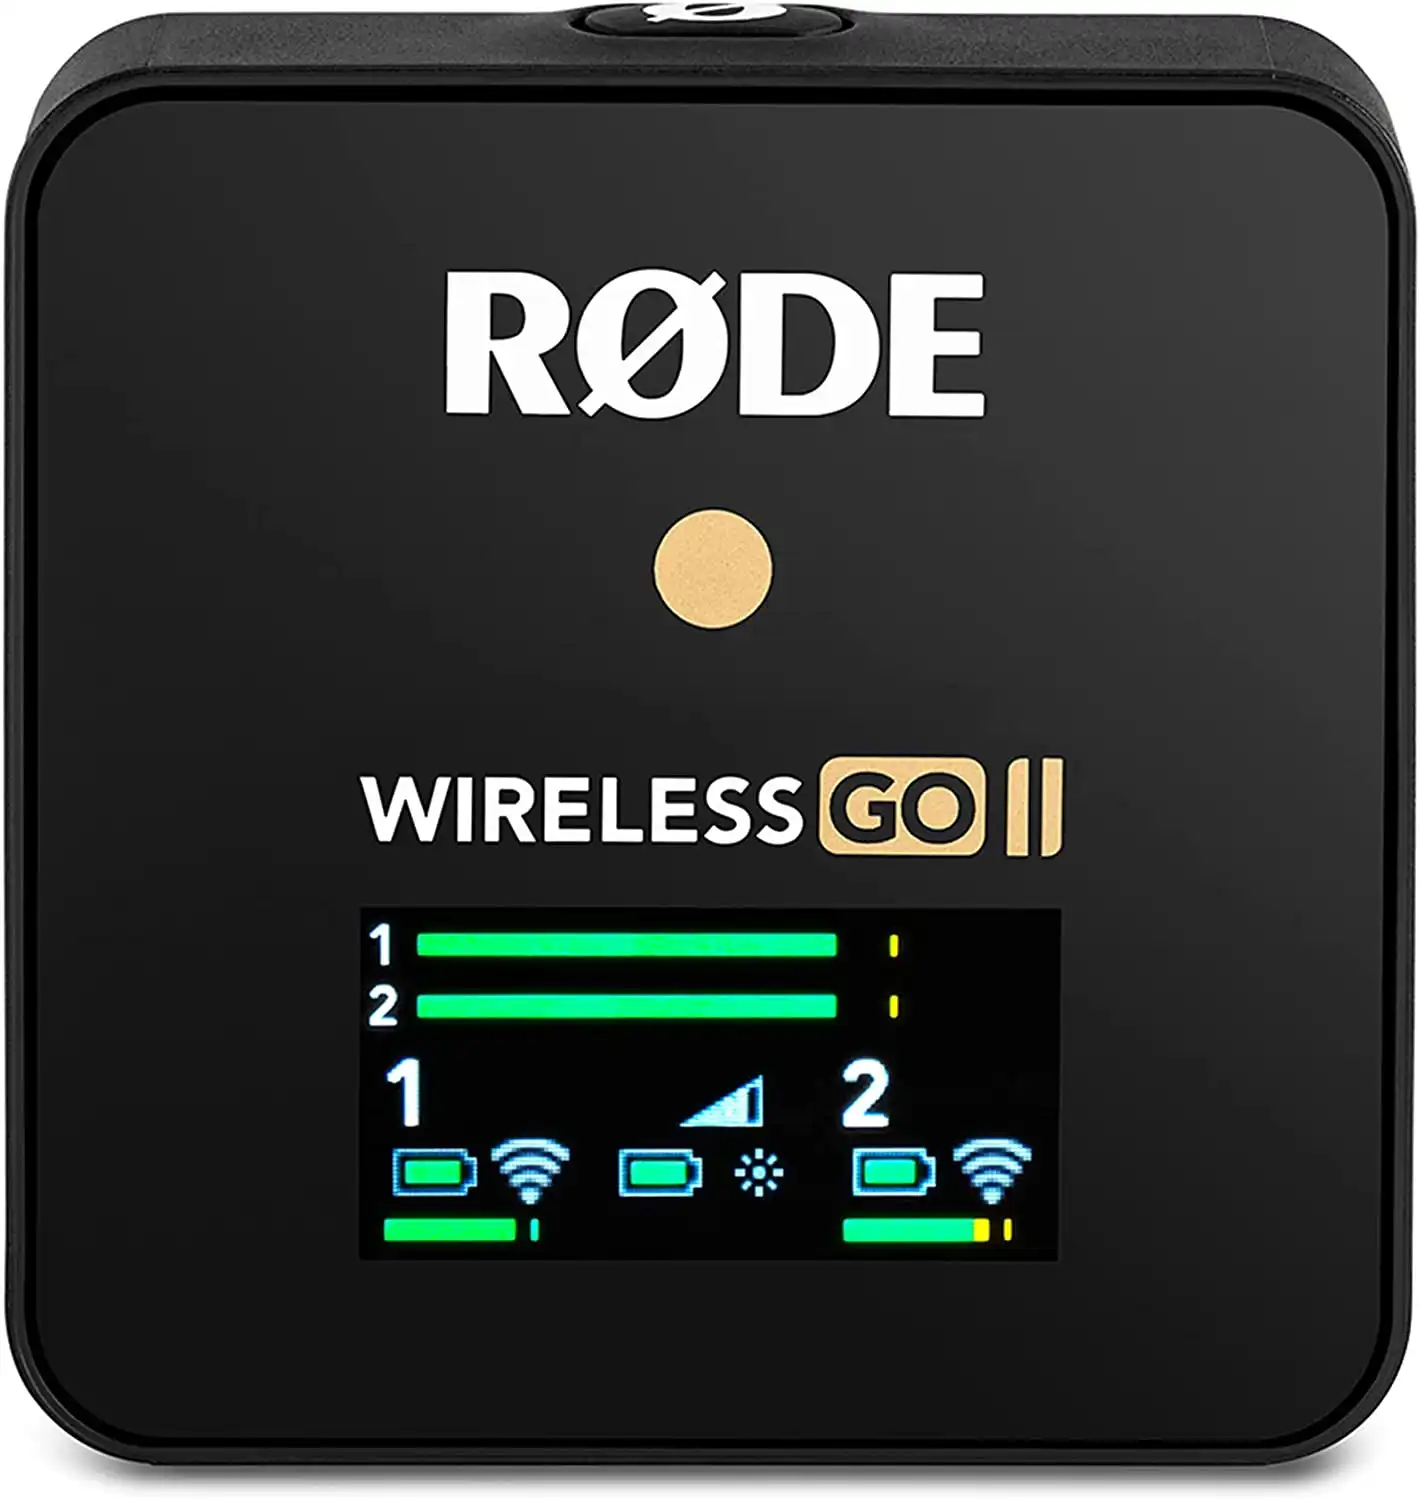 Rode Wireless Go II best settings and how to use on a mirrorless camera 